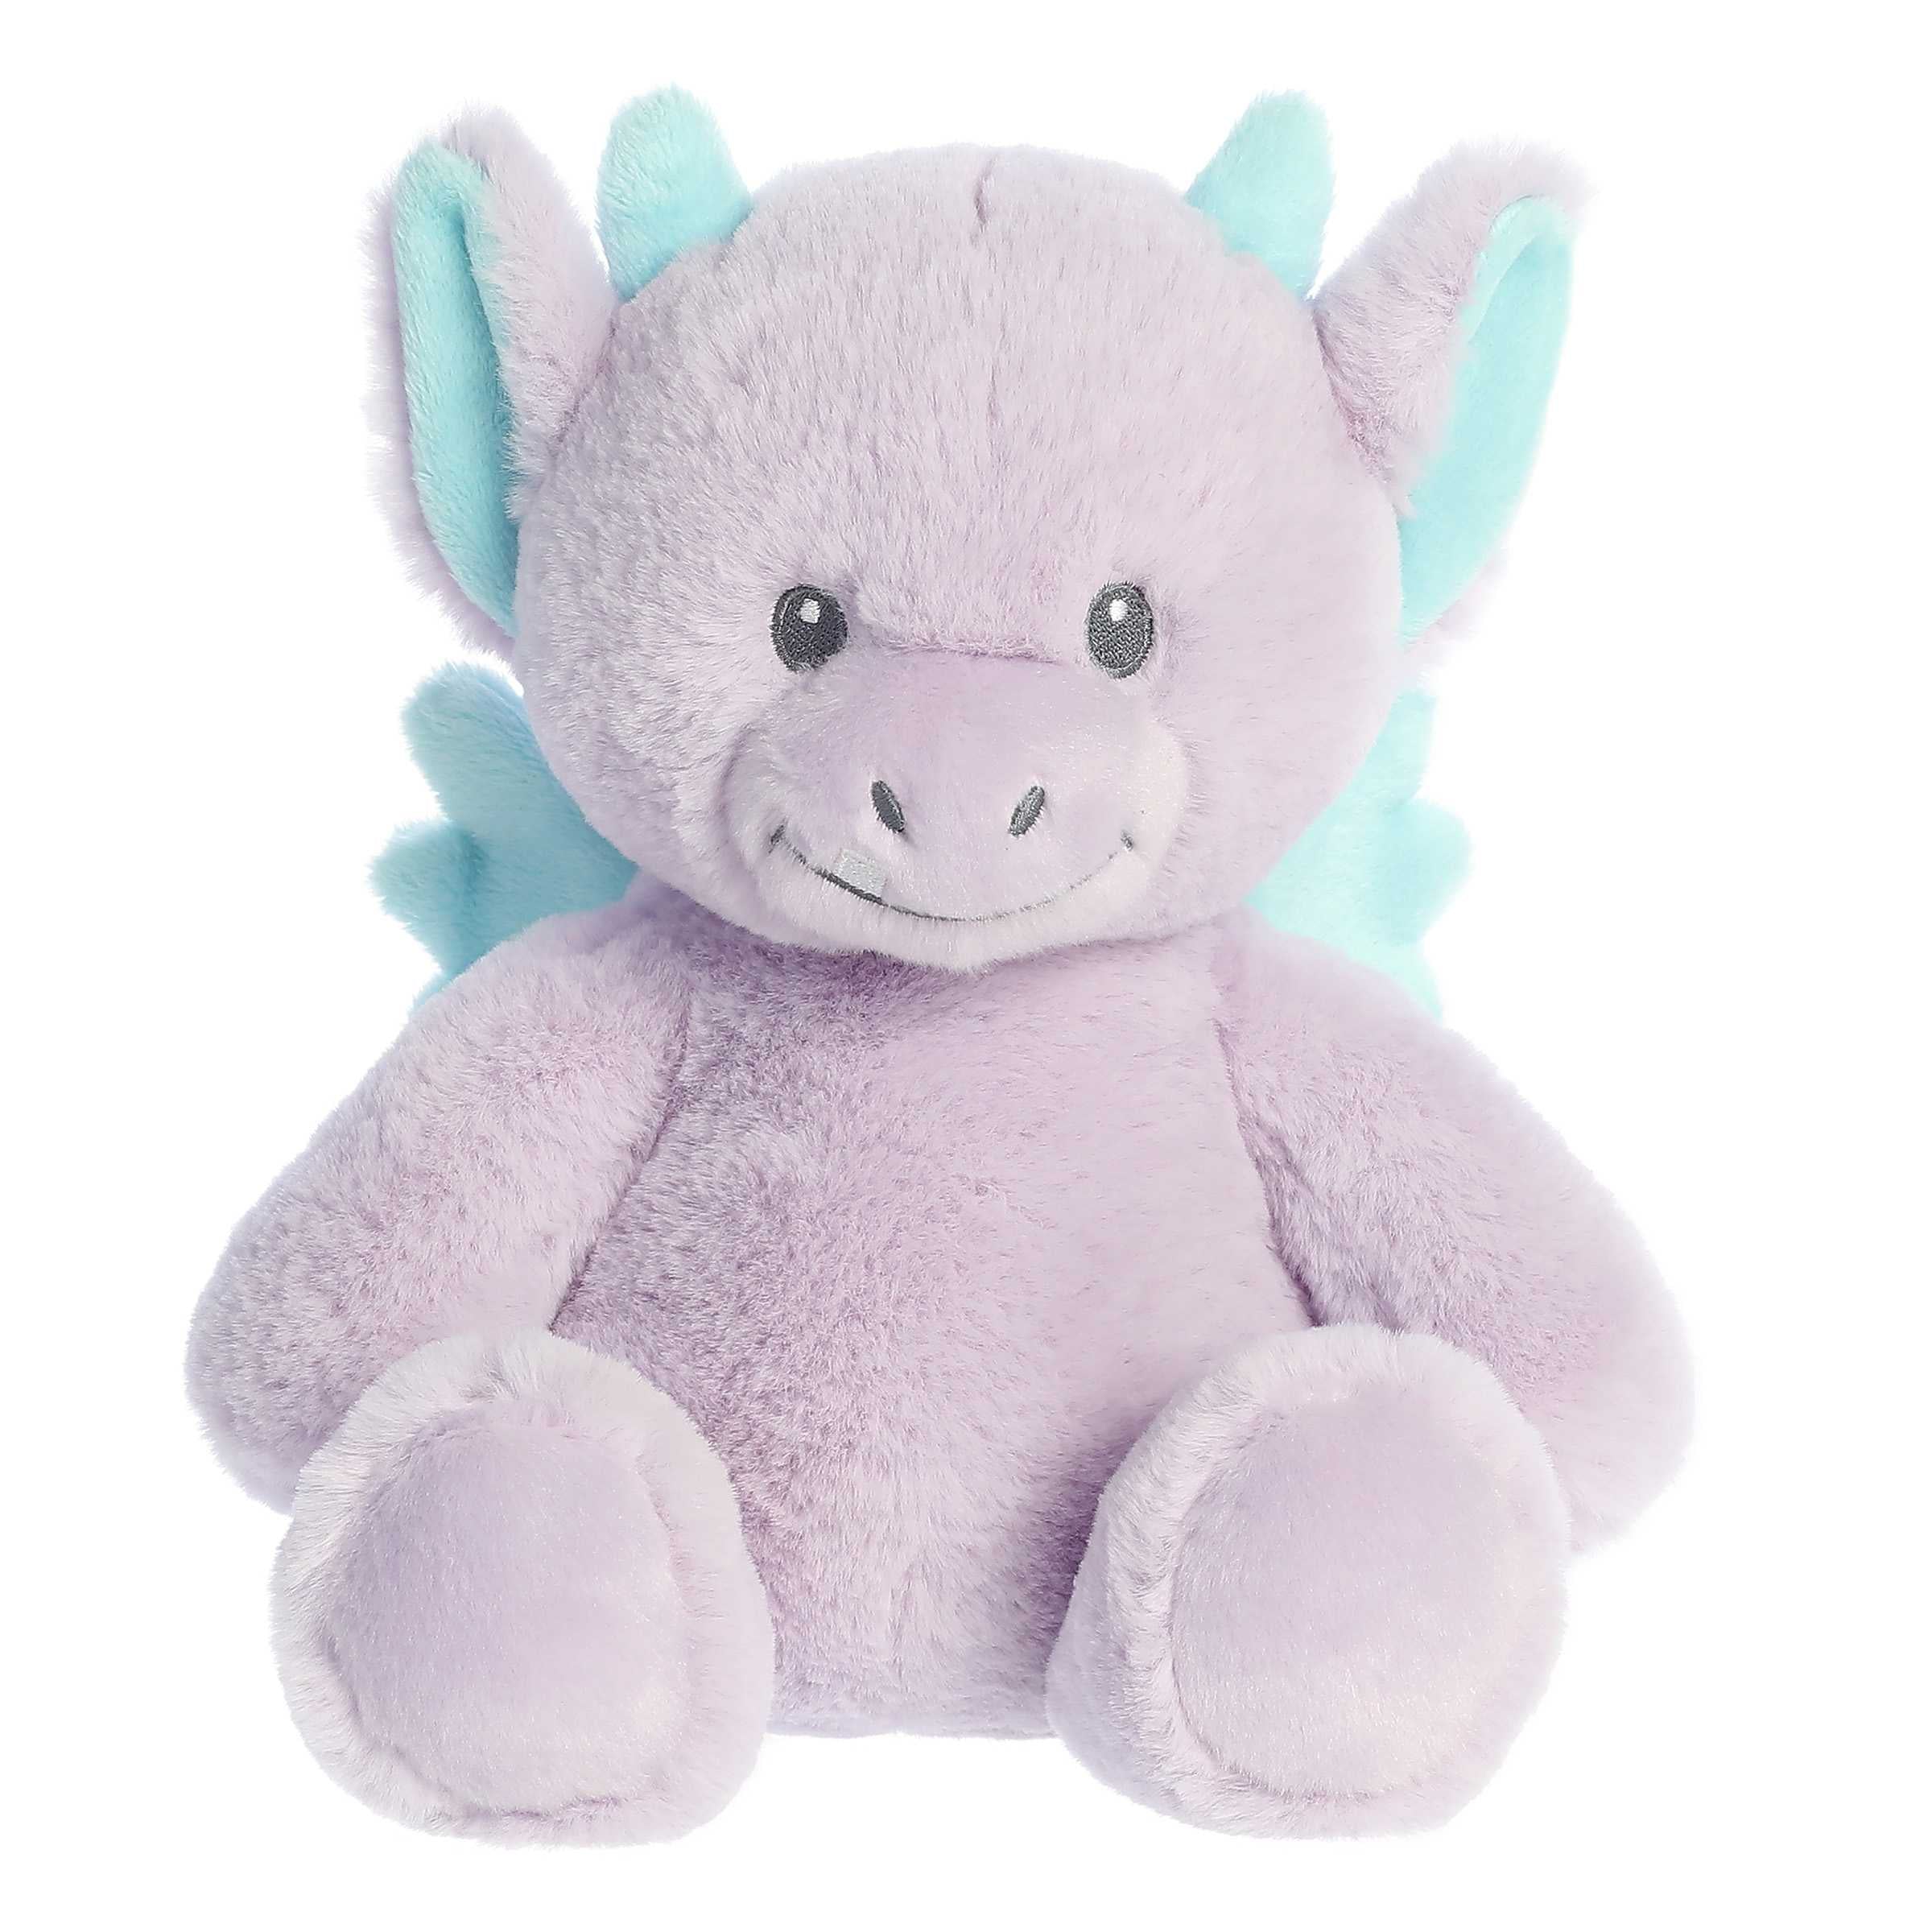 Adorable Dani Dragon plush toy with light purple body, smiling face and blue wings and horns in a sitting position.